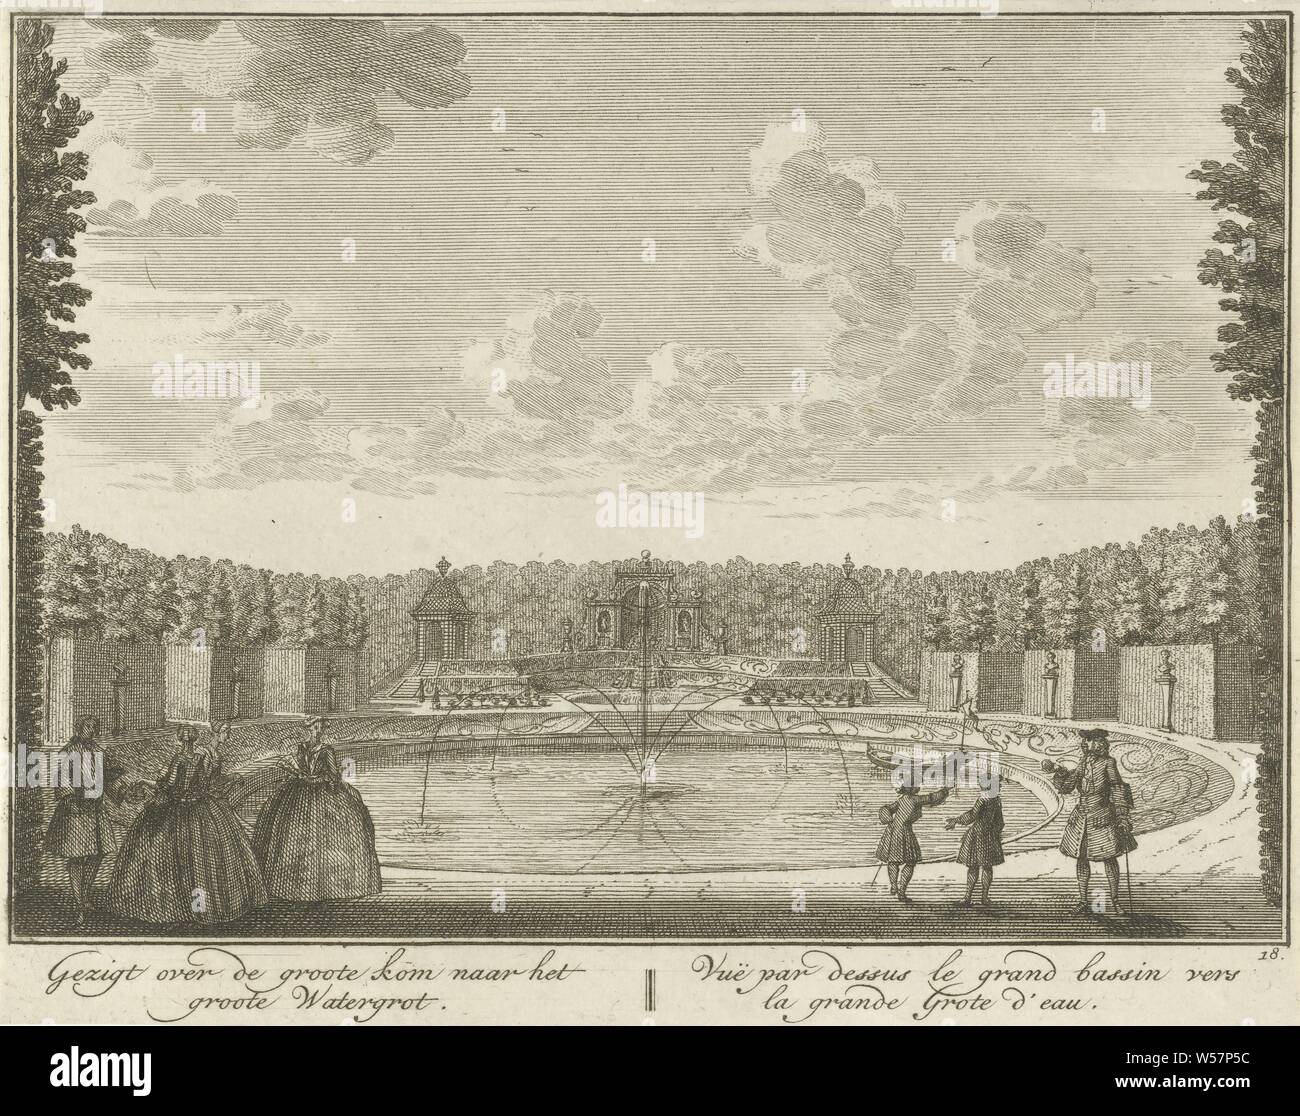 View of the basin towards the water grotto in the garden of Huis ter Meer in Maarssen View over the large basin to the large Water grotto / Vue par dessus le grand basin vers la grande Grote d'eau (title on object) The Oud Adelyk huys and Ridderhofstad Ter Meer (series title), View of the basin towards the water cave in the French garden of Huis ter Meer. In the foreground are some figures on the edge of the basin. The print is part of a series with 26 faces on Huis ter Meer and the accompanying estate in Maarssen, country house, French or architectonic garden, formal garden, garden fountain Stock Photo